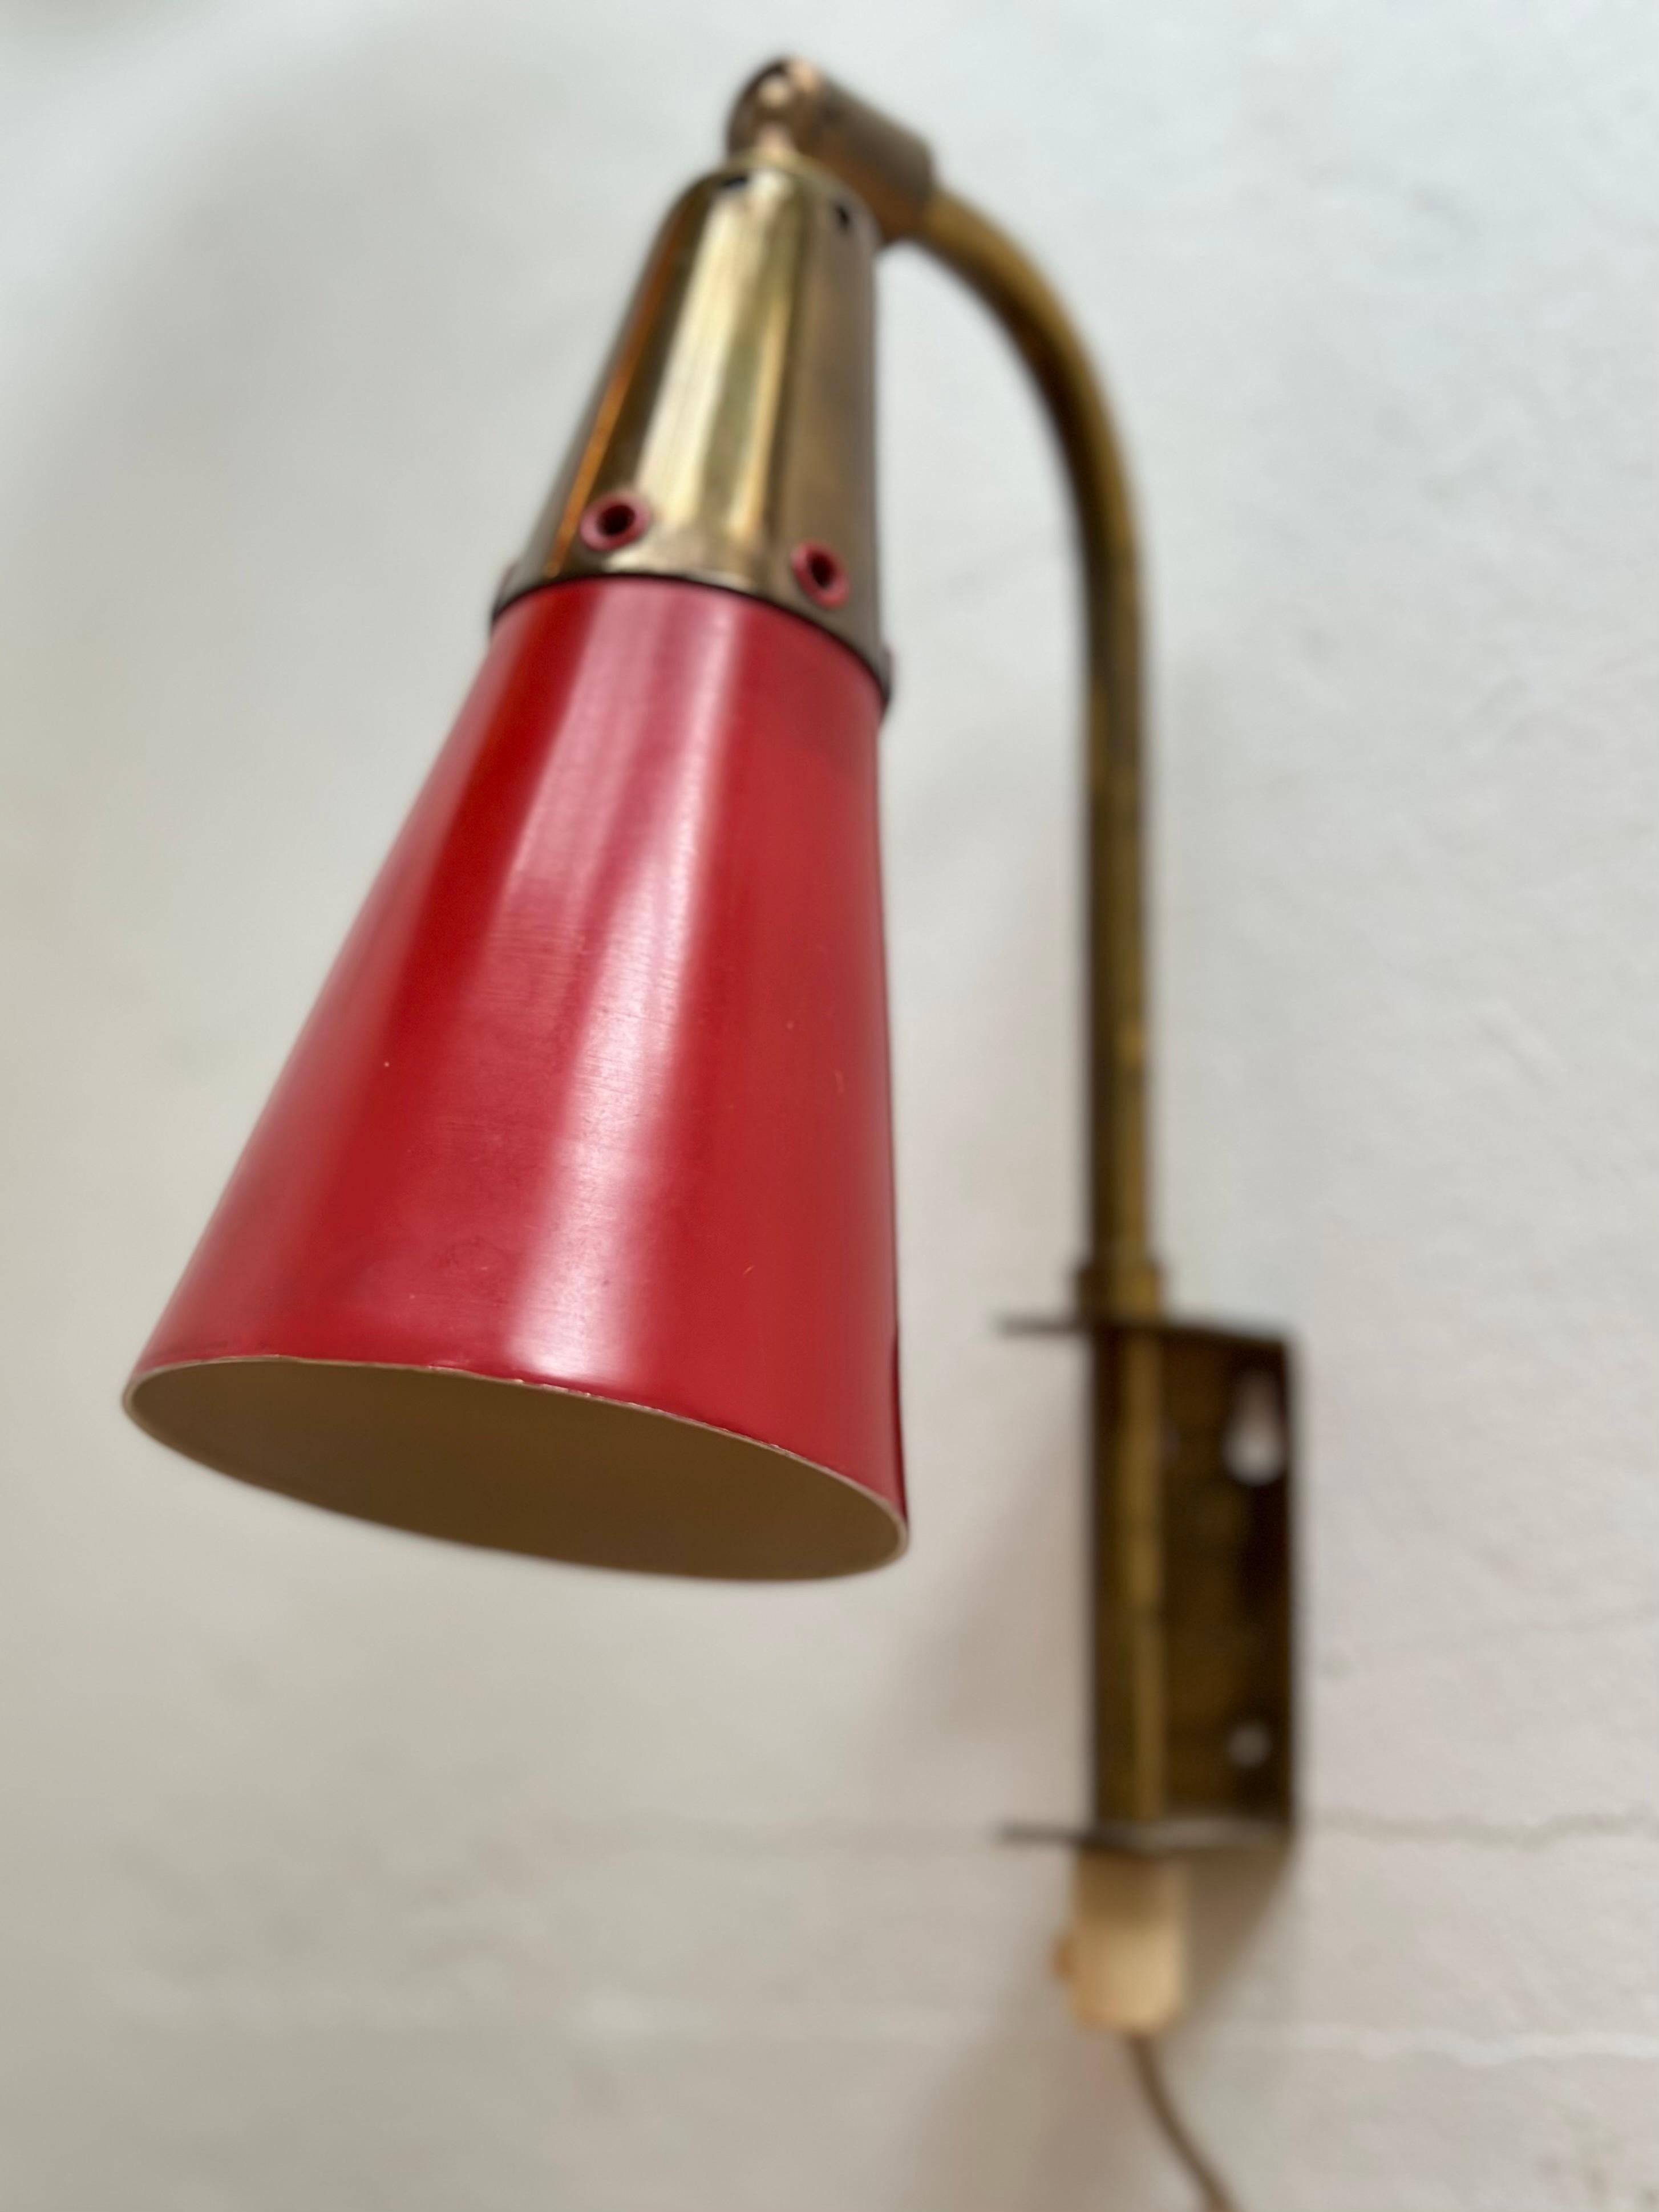 Swedish Modern Pair of Red Lacquer and Brass Wall Lights by Upsala Armaturfabrik For Sale 2